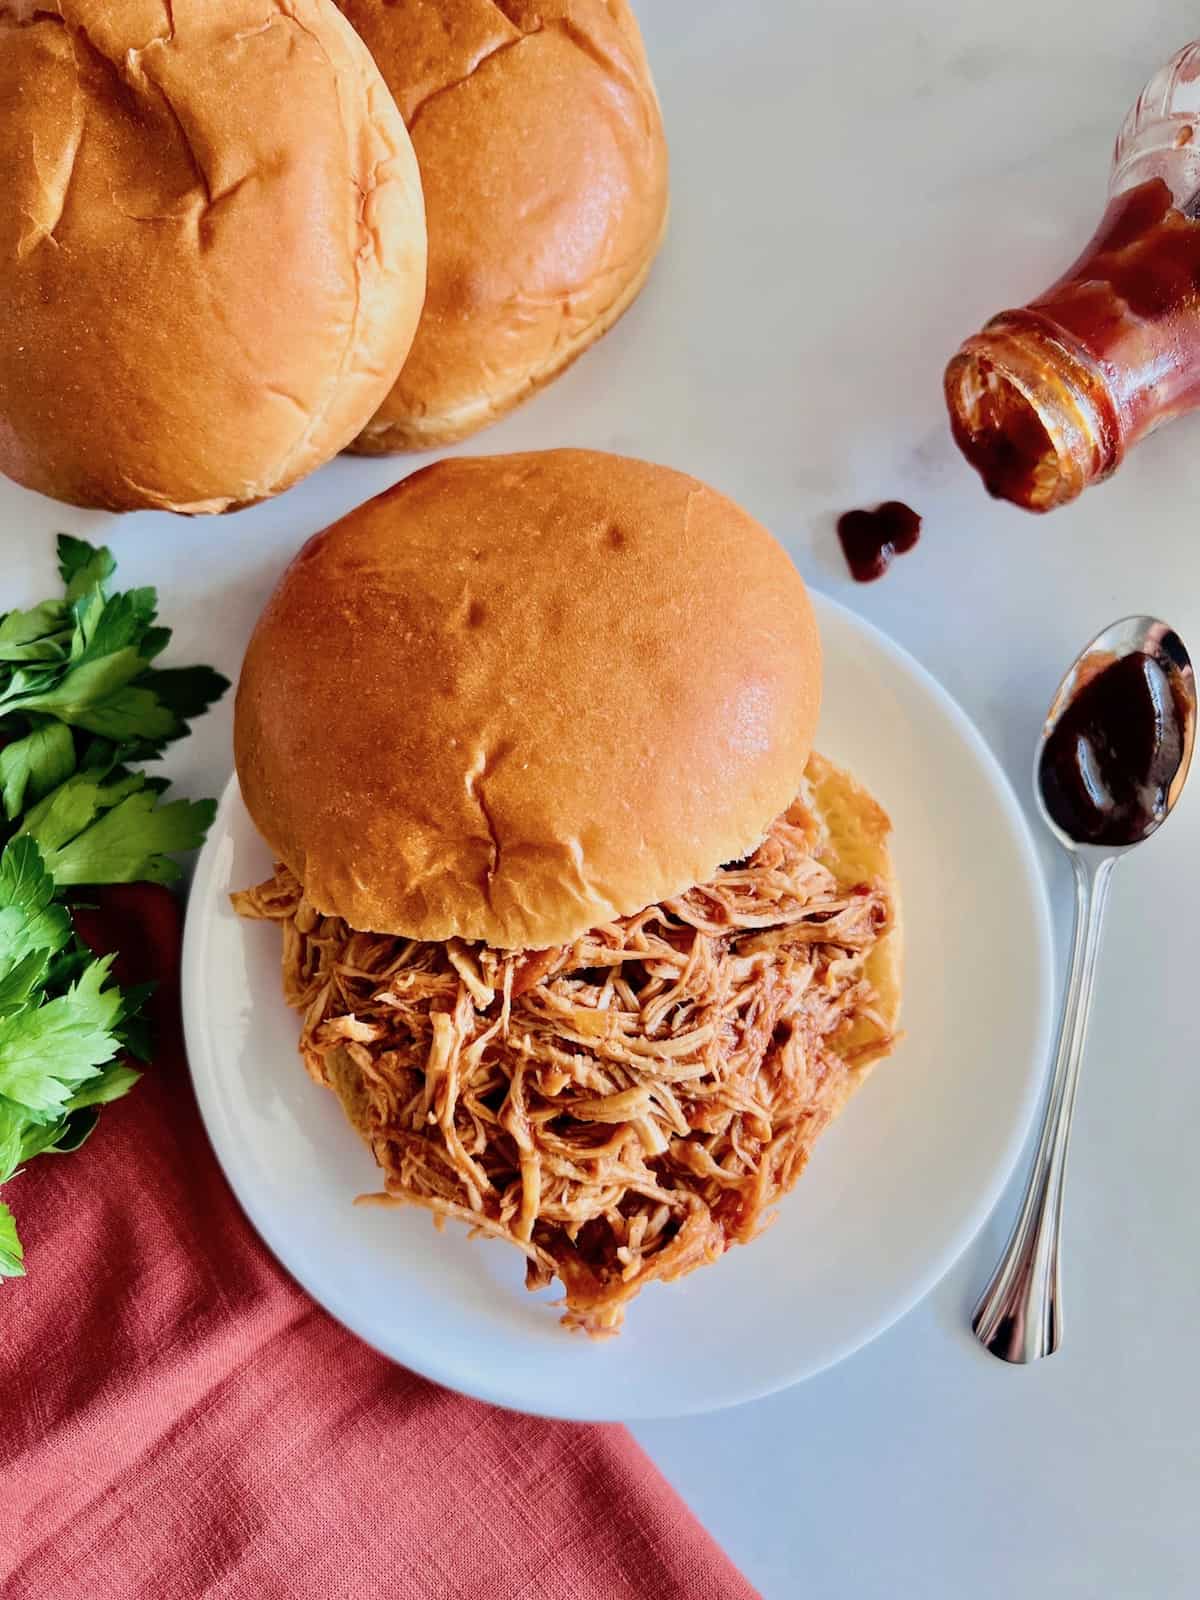 Slow Cooker BBQ Pulled Chicken On a bun plated next to buns bbq sauce in a bottle and on a spoon with parsley and red napkins.